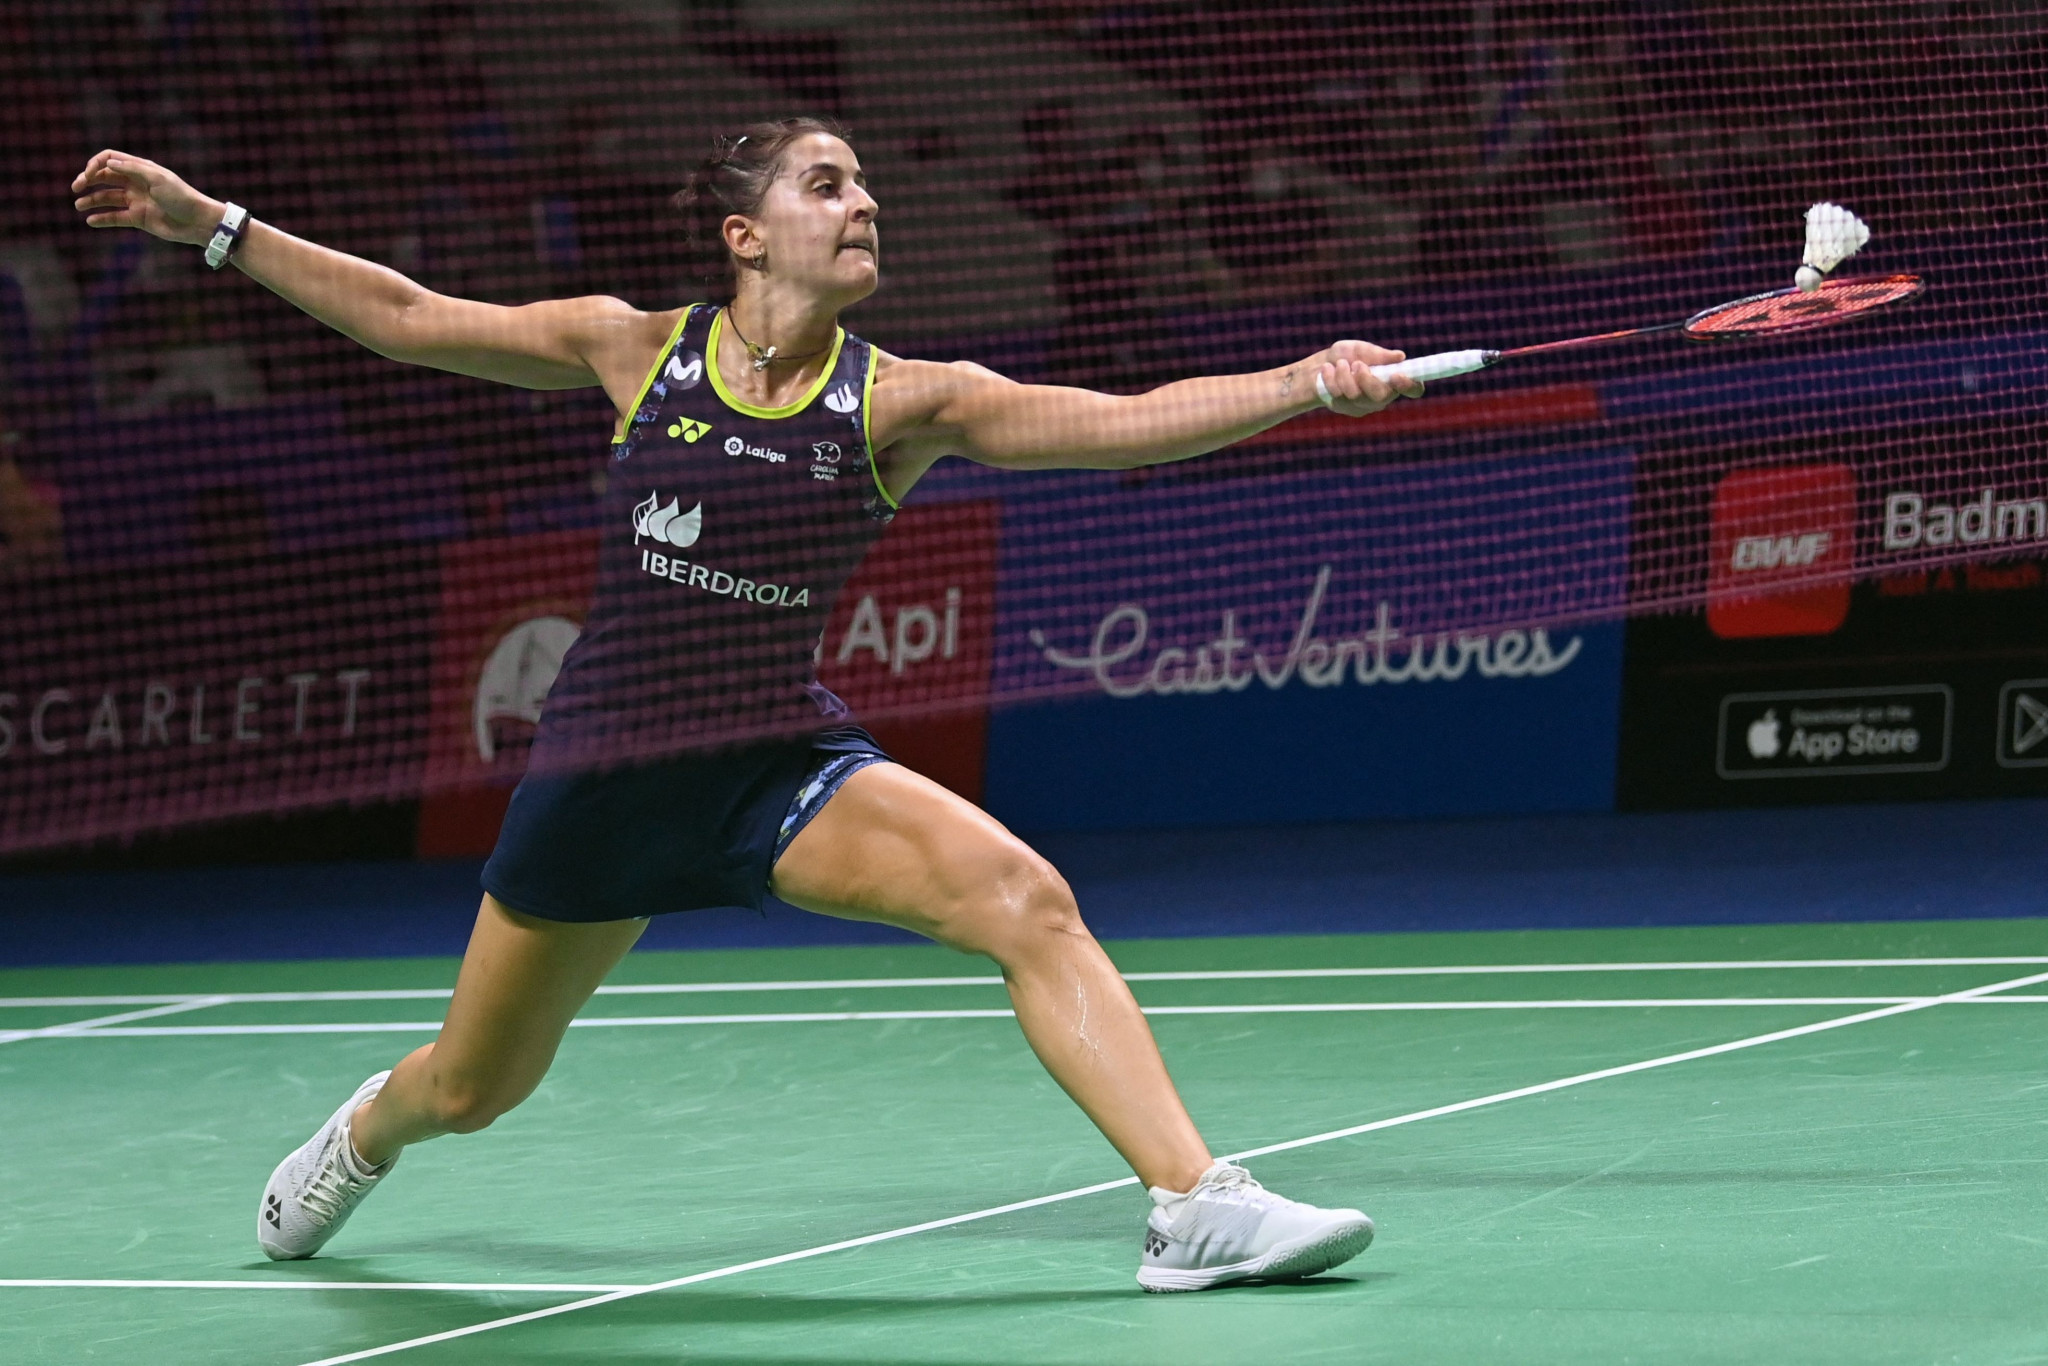 Marín exits but Axelsen storms on at BWF Indonesia Open